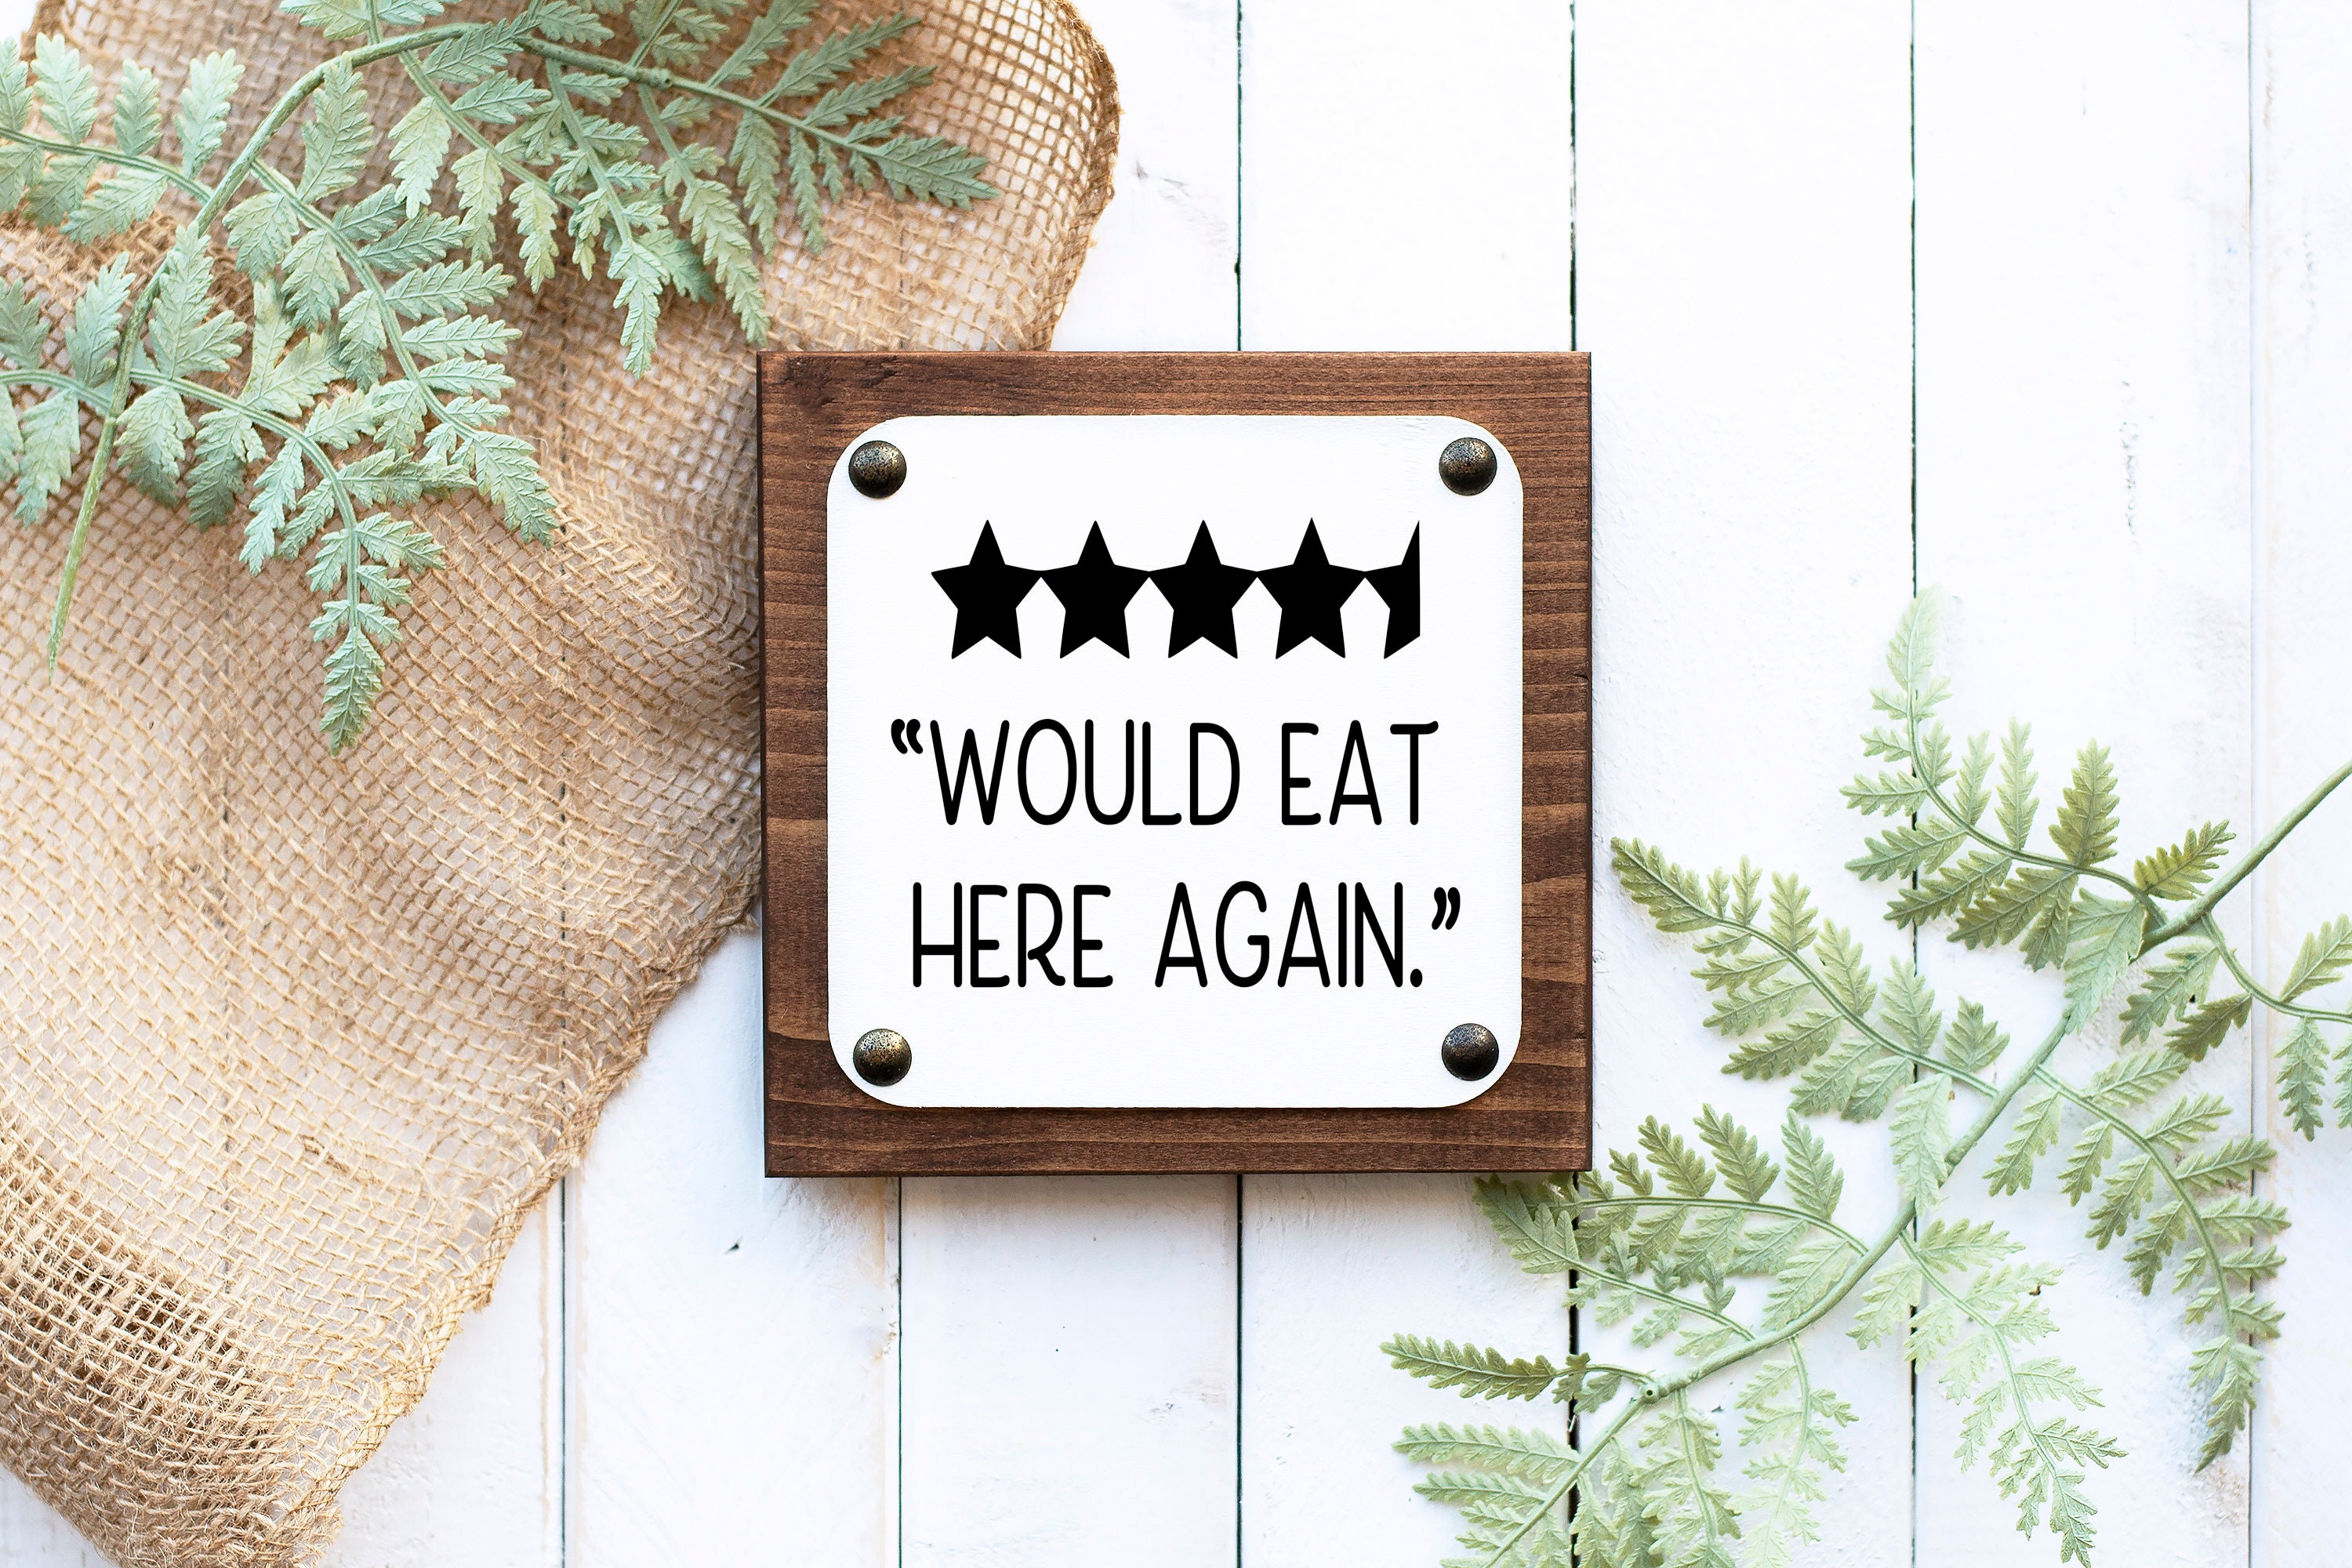 Funny Kitchen signs-wall decor-would eat here again sign-shelf